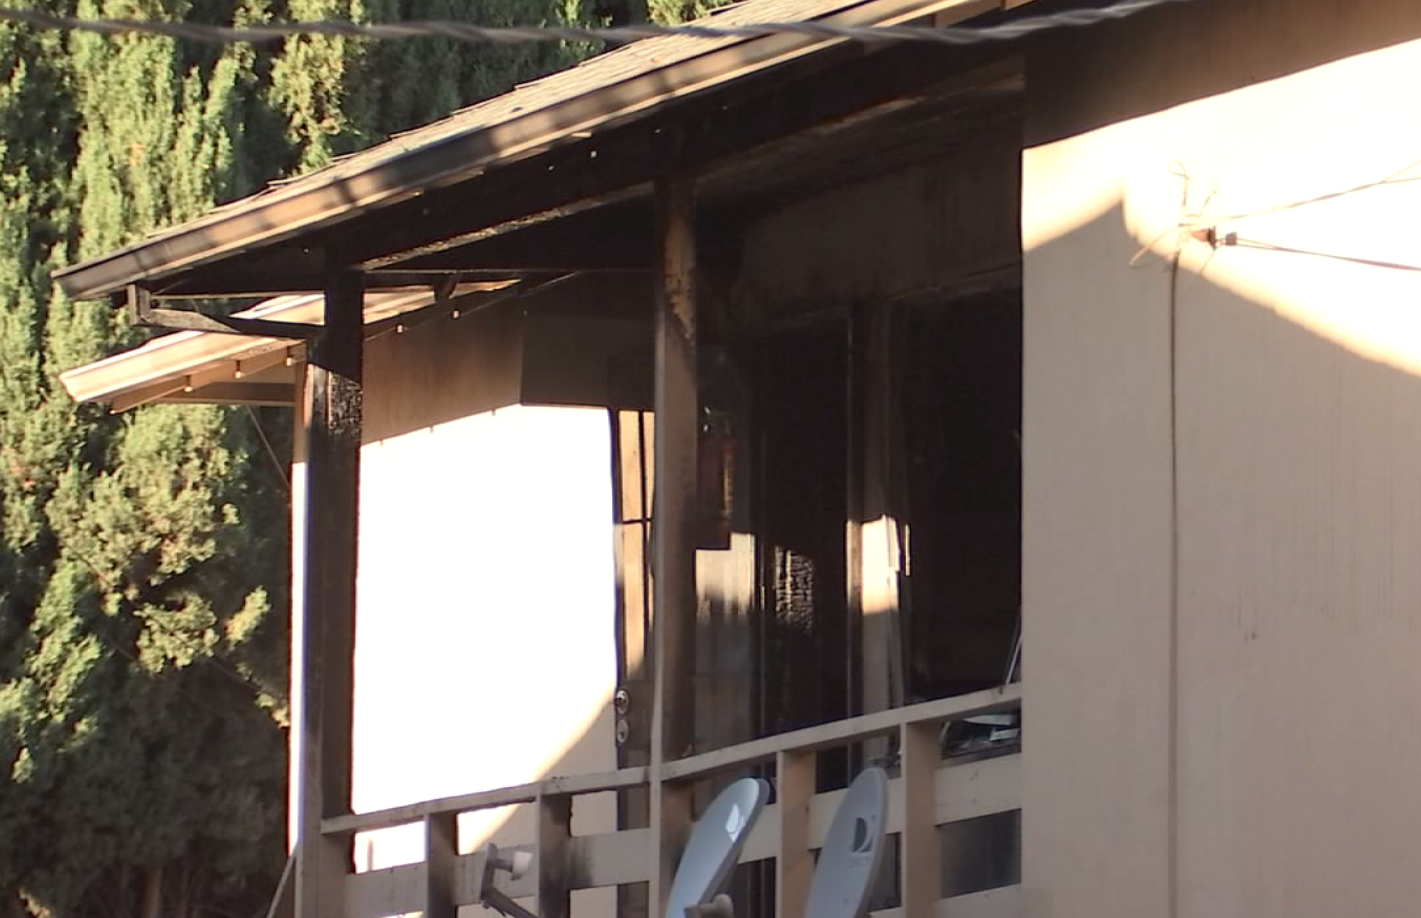 3 killed, another injured in San Jose apartment fire